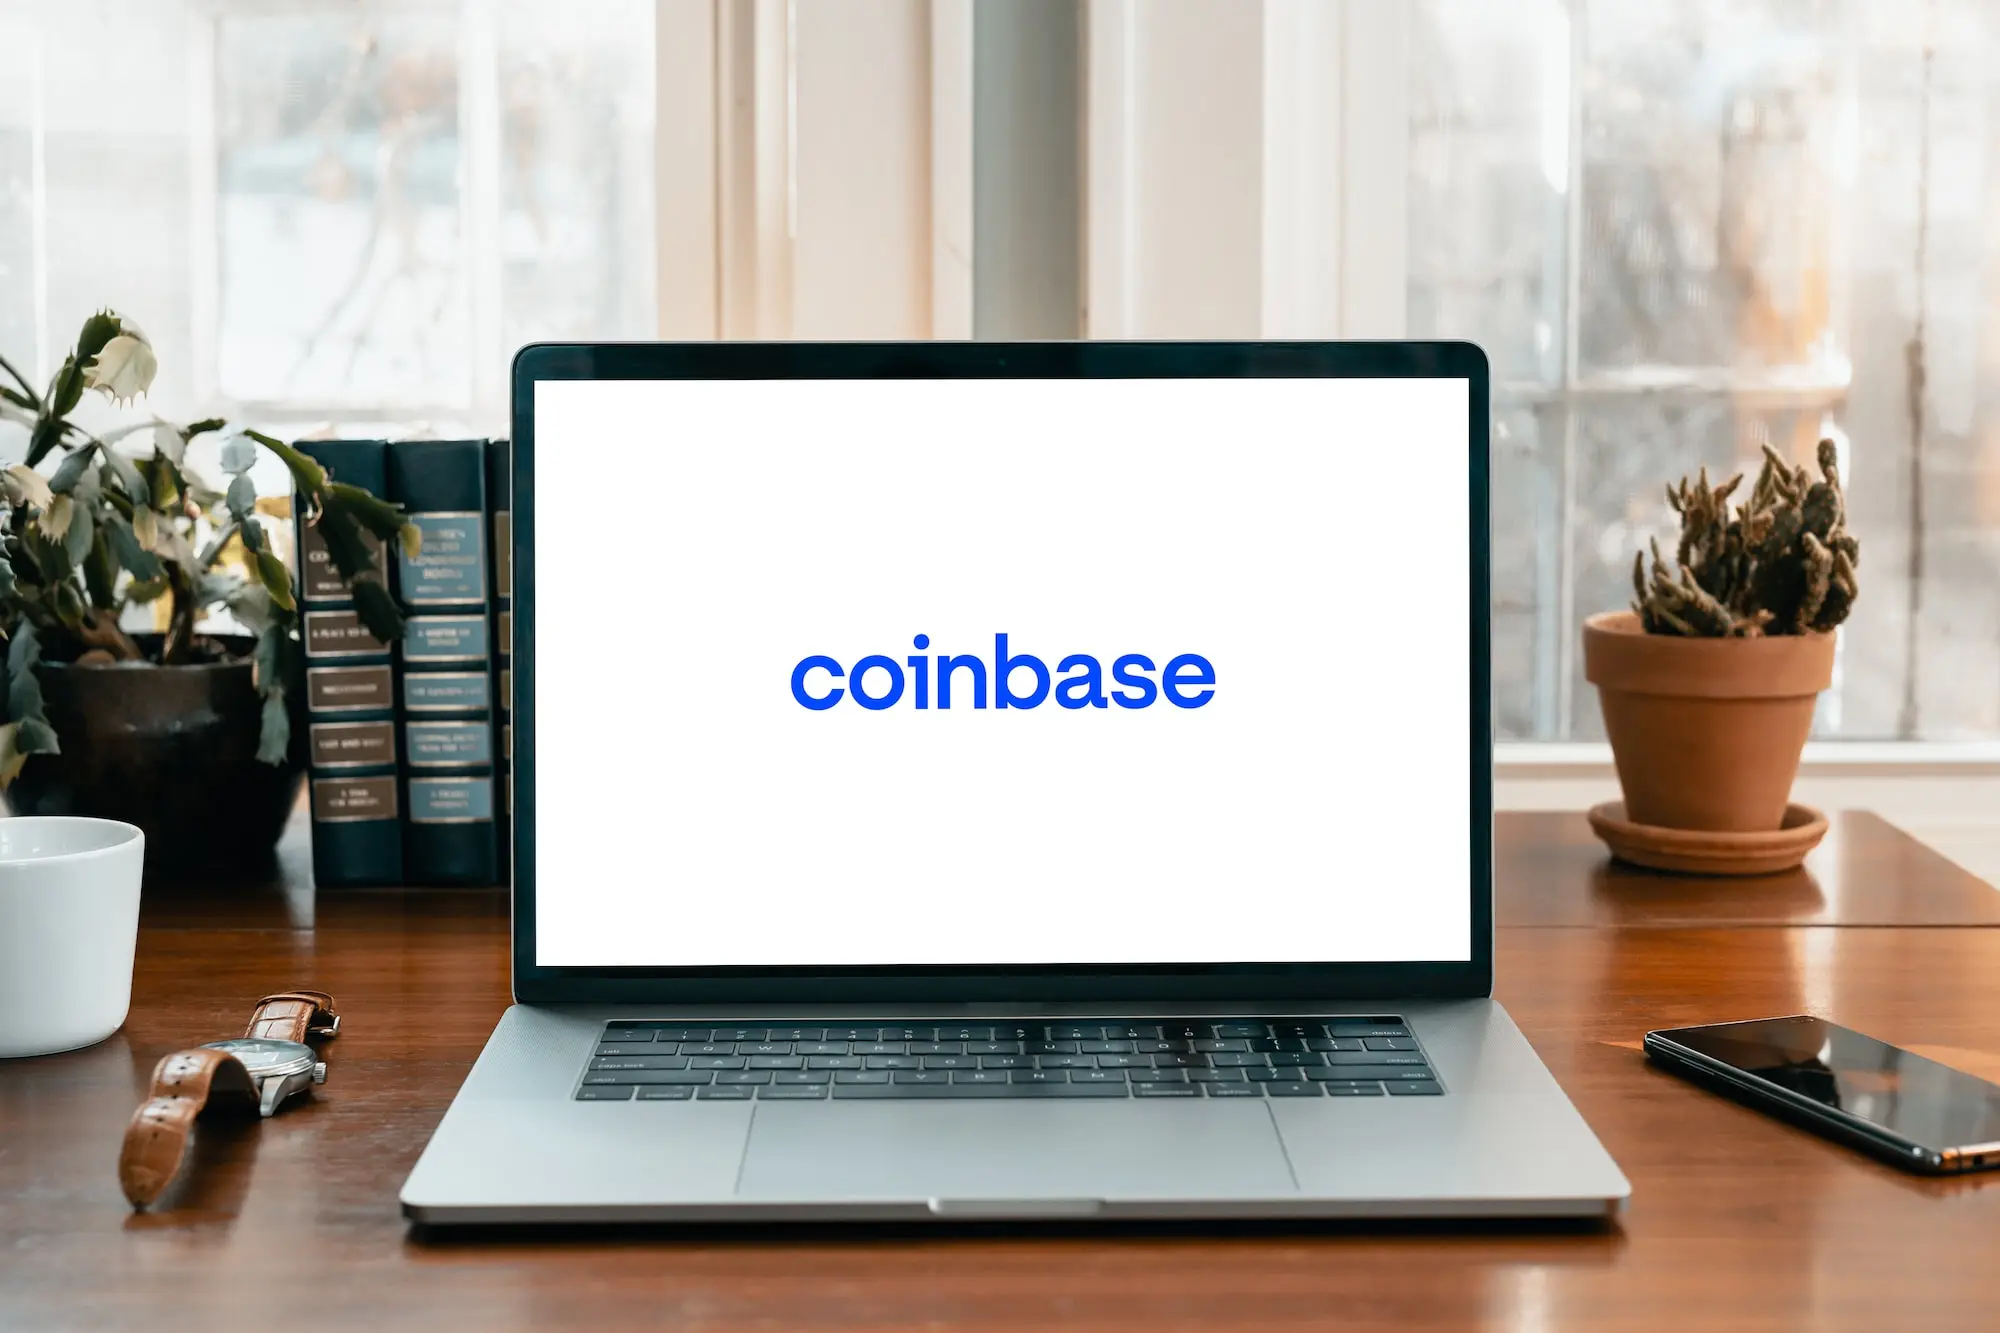 Coinbase Q3 Report: Subscriptions Up, Users and Revenue Down